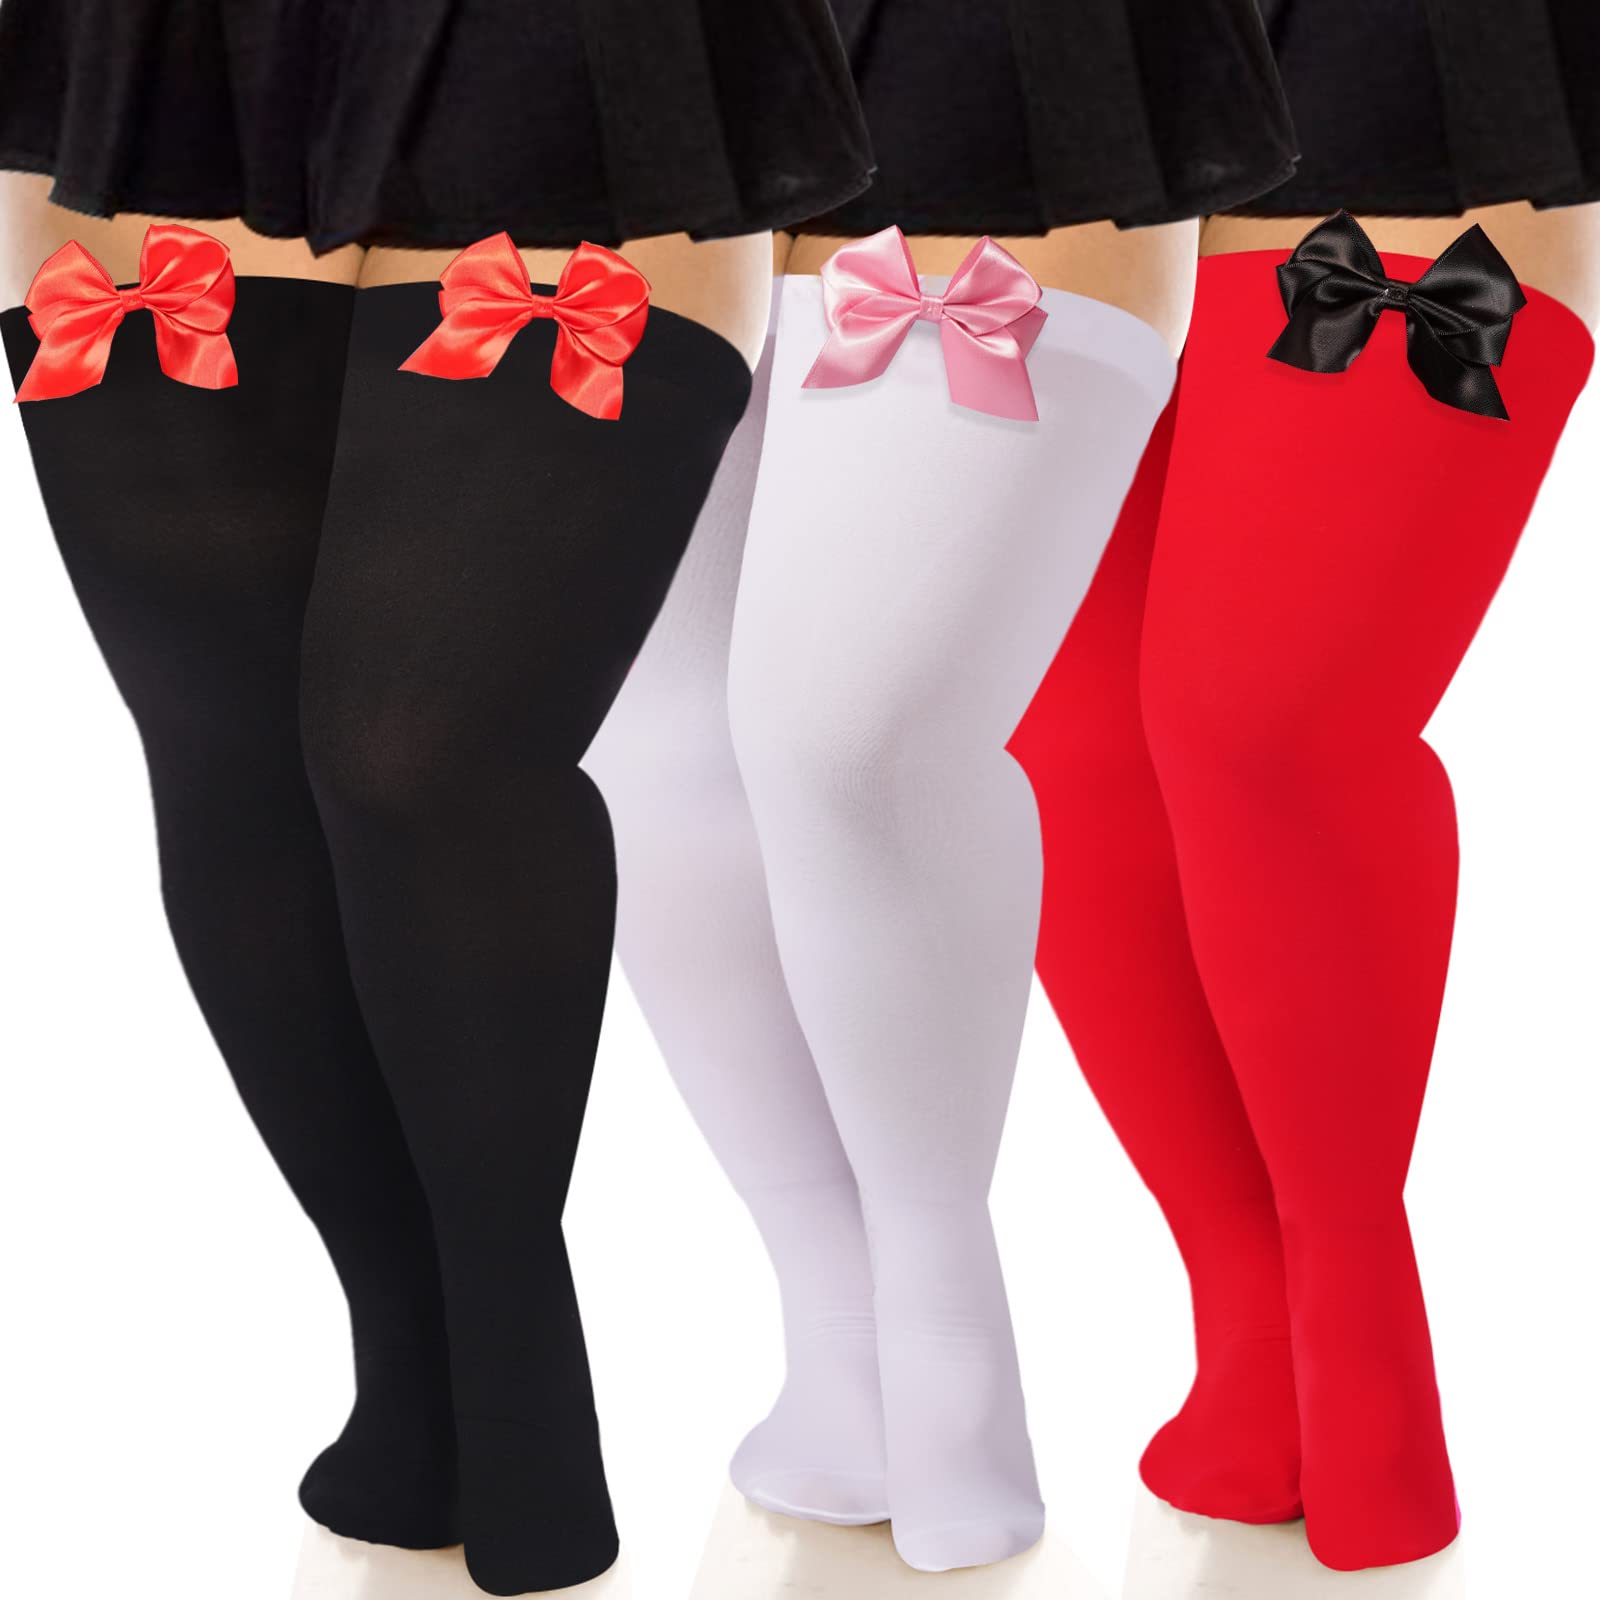 3 Pairs Women Plus Size Bow Thigh Highs Stockings-White & Black & Red - Moon Wood